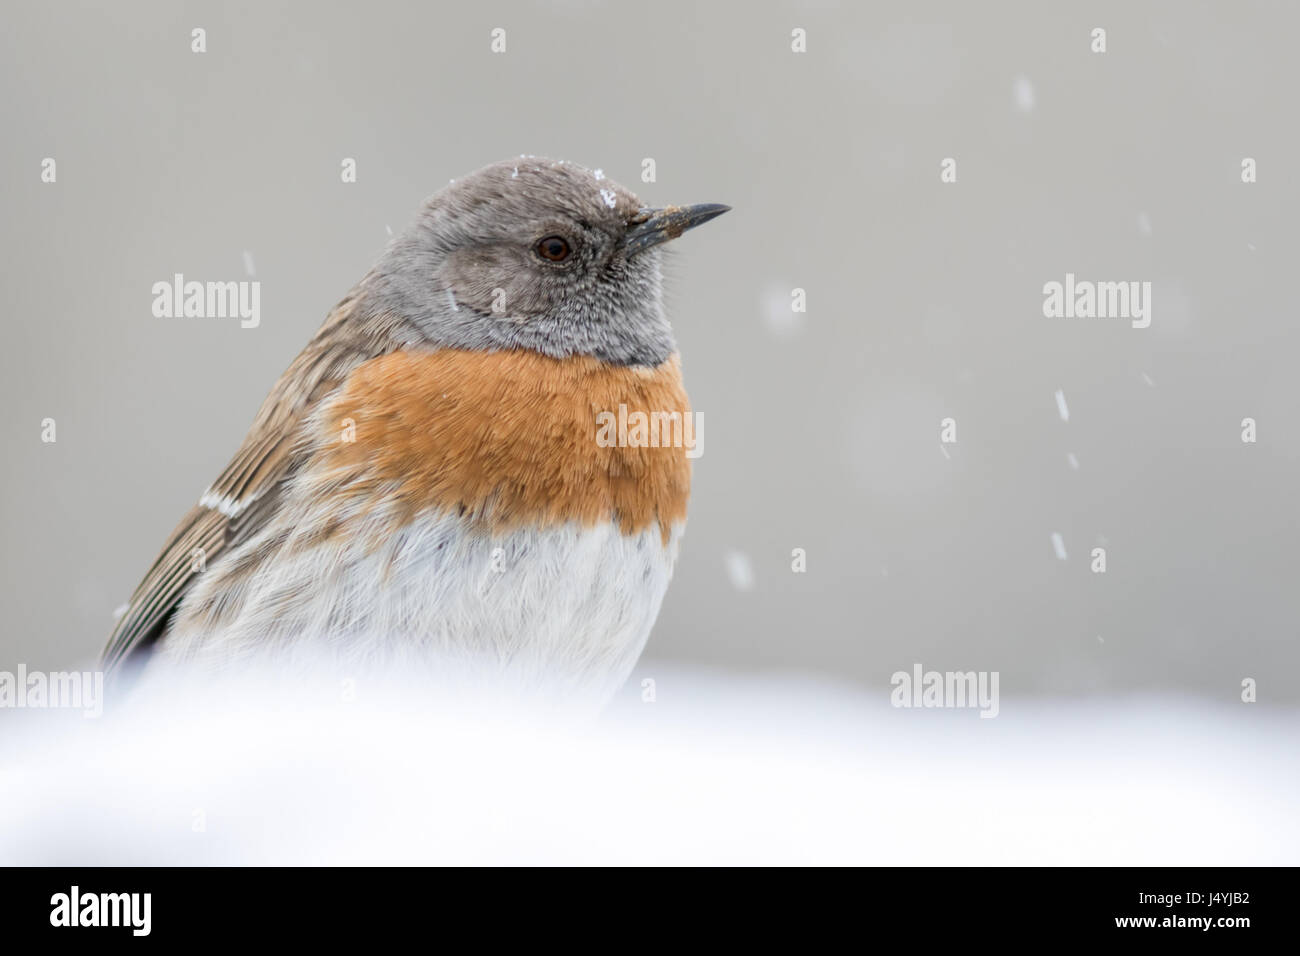 The robin accentor (Prunella rubeculoides) Stock Photo